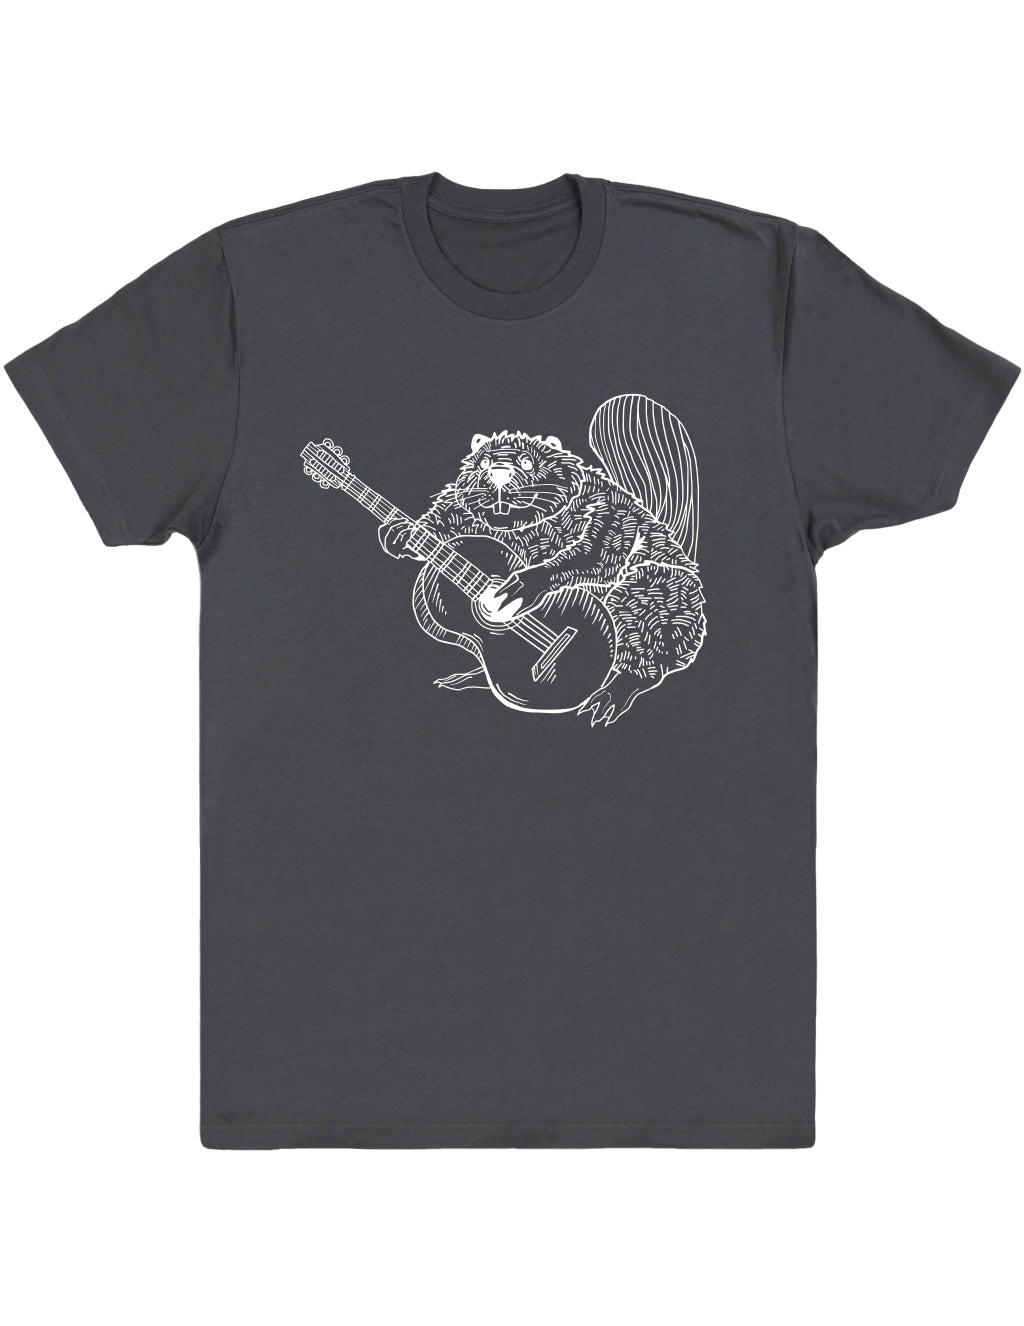 seembo-t-shirt-with-beaver-guitar-player-guitarist-front-design